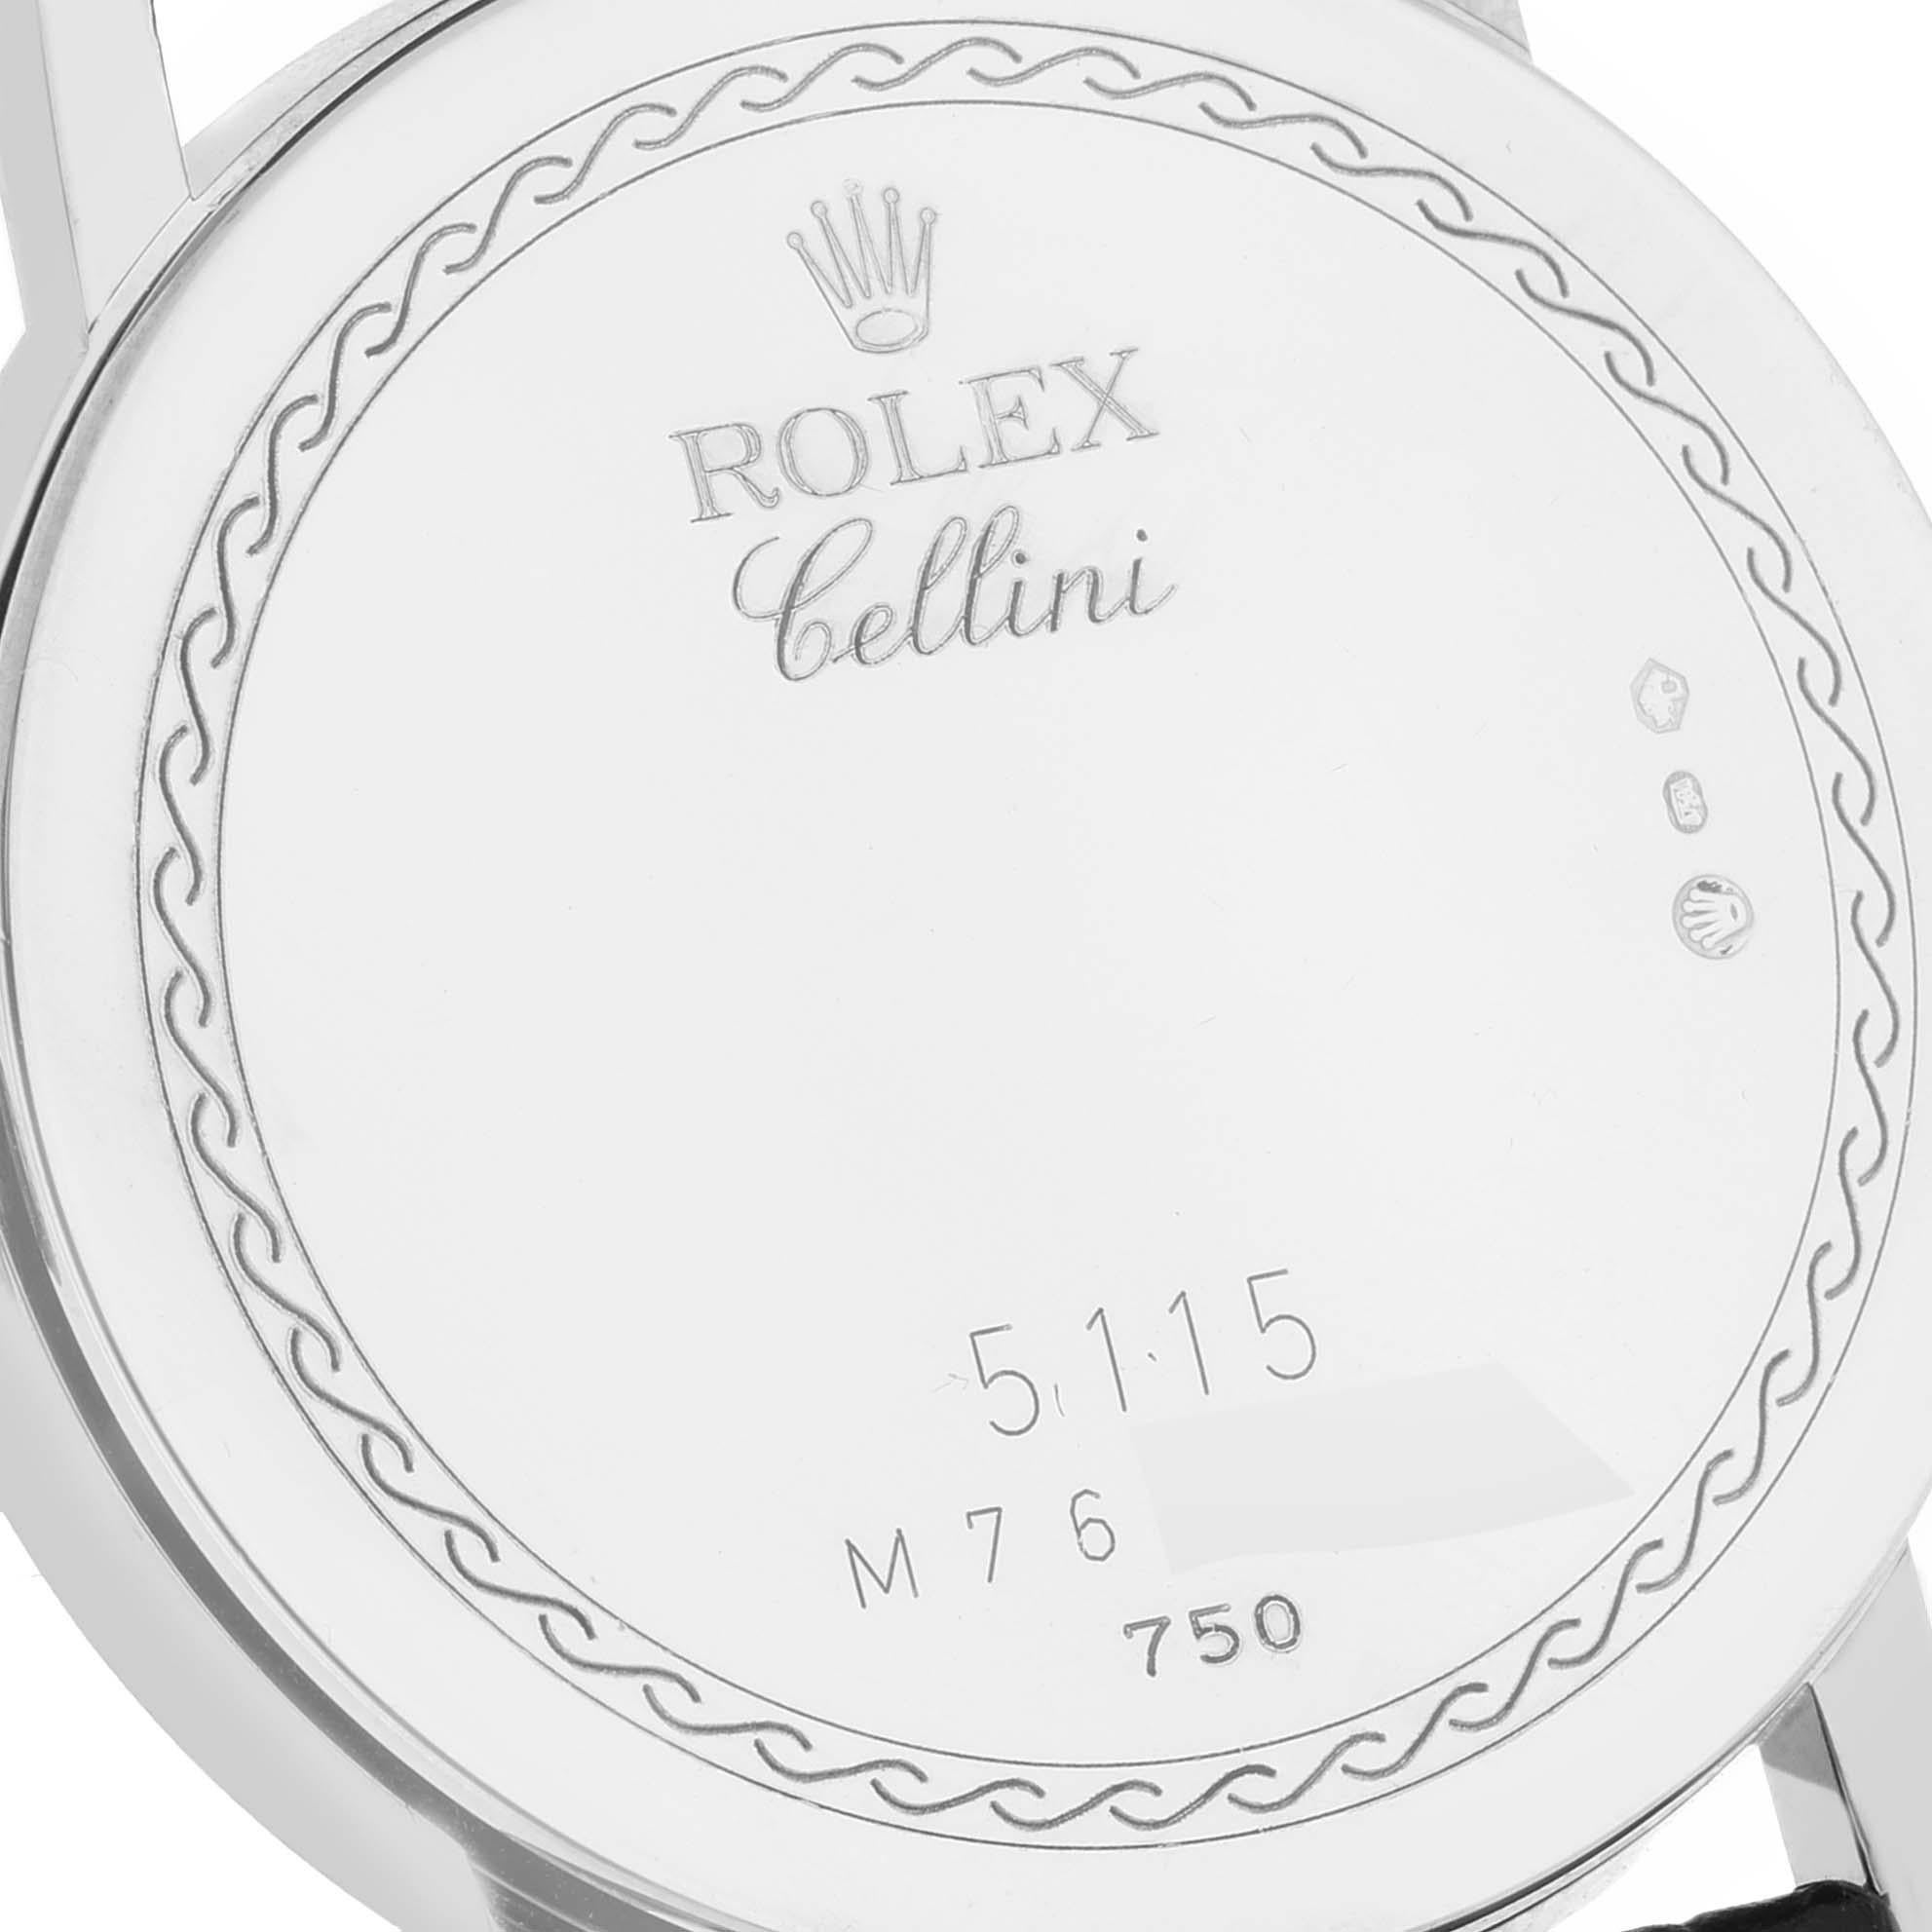 Rolex Cellini Classic White Gold Ivory Anniversary Dial Mens Watch 5115 1